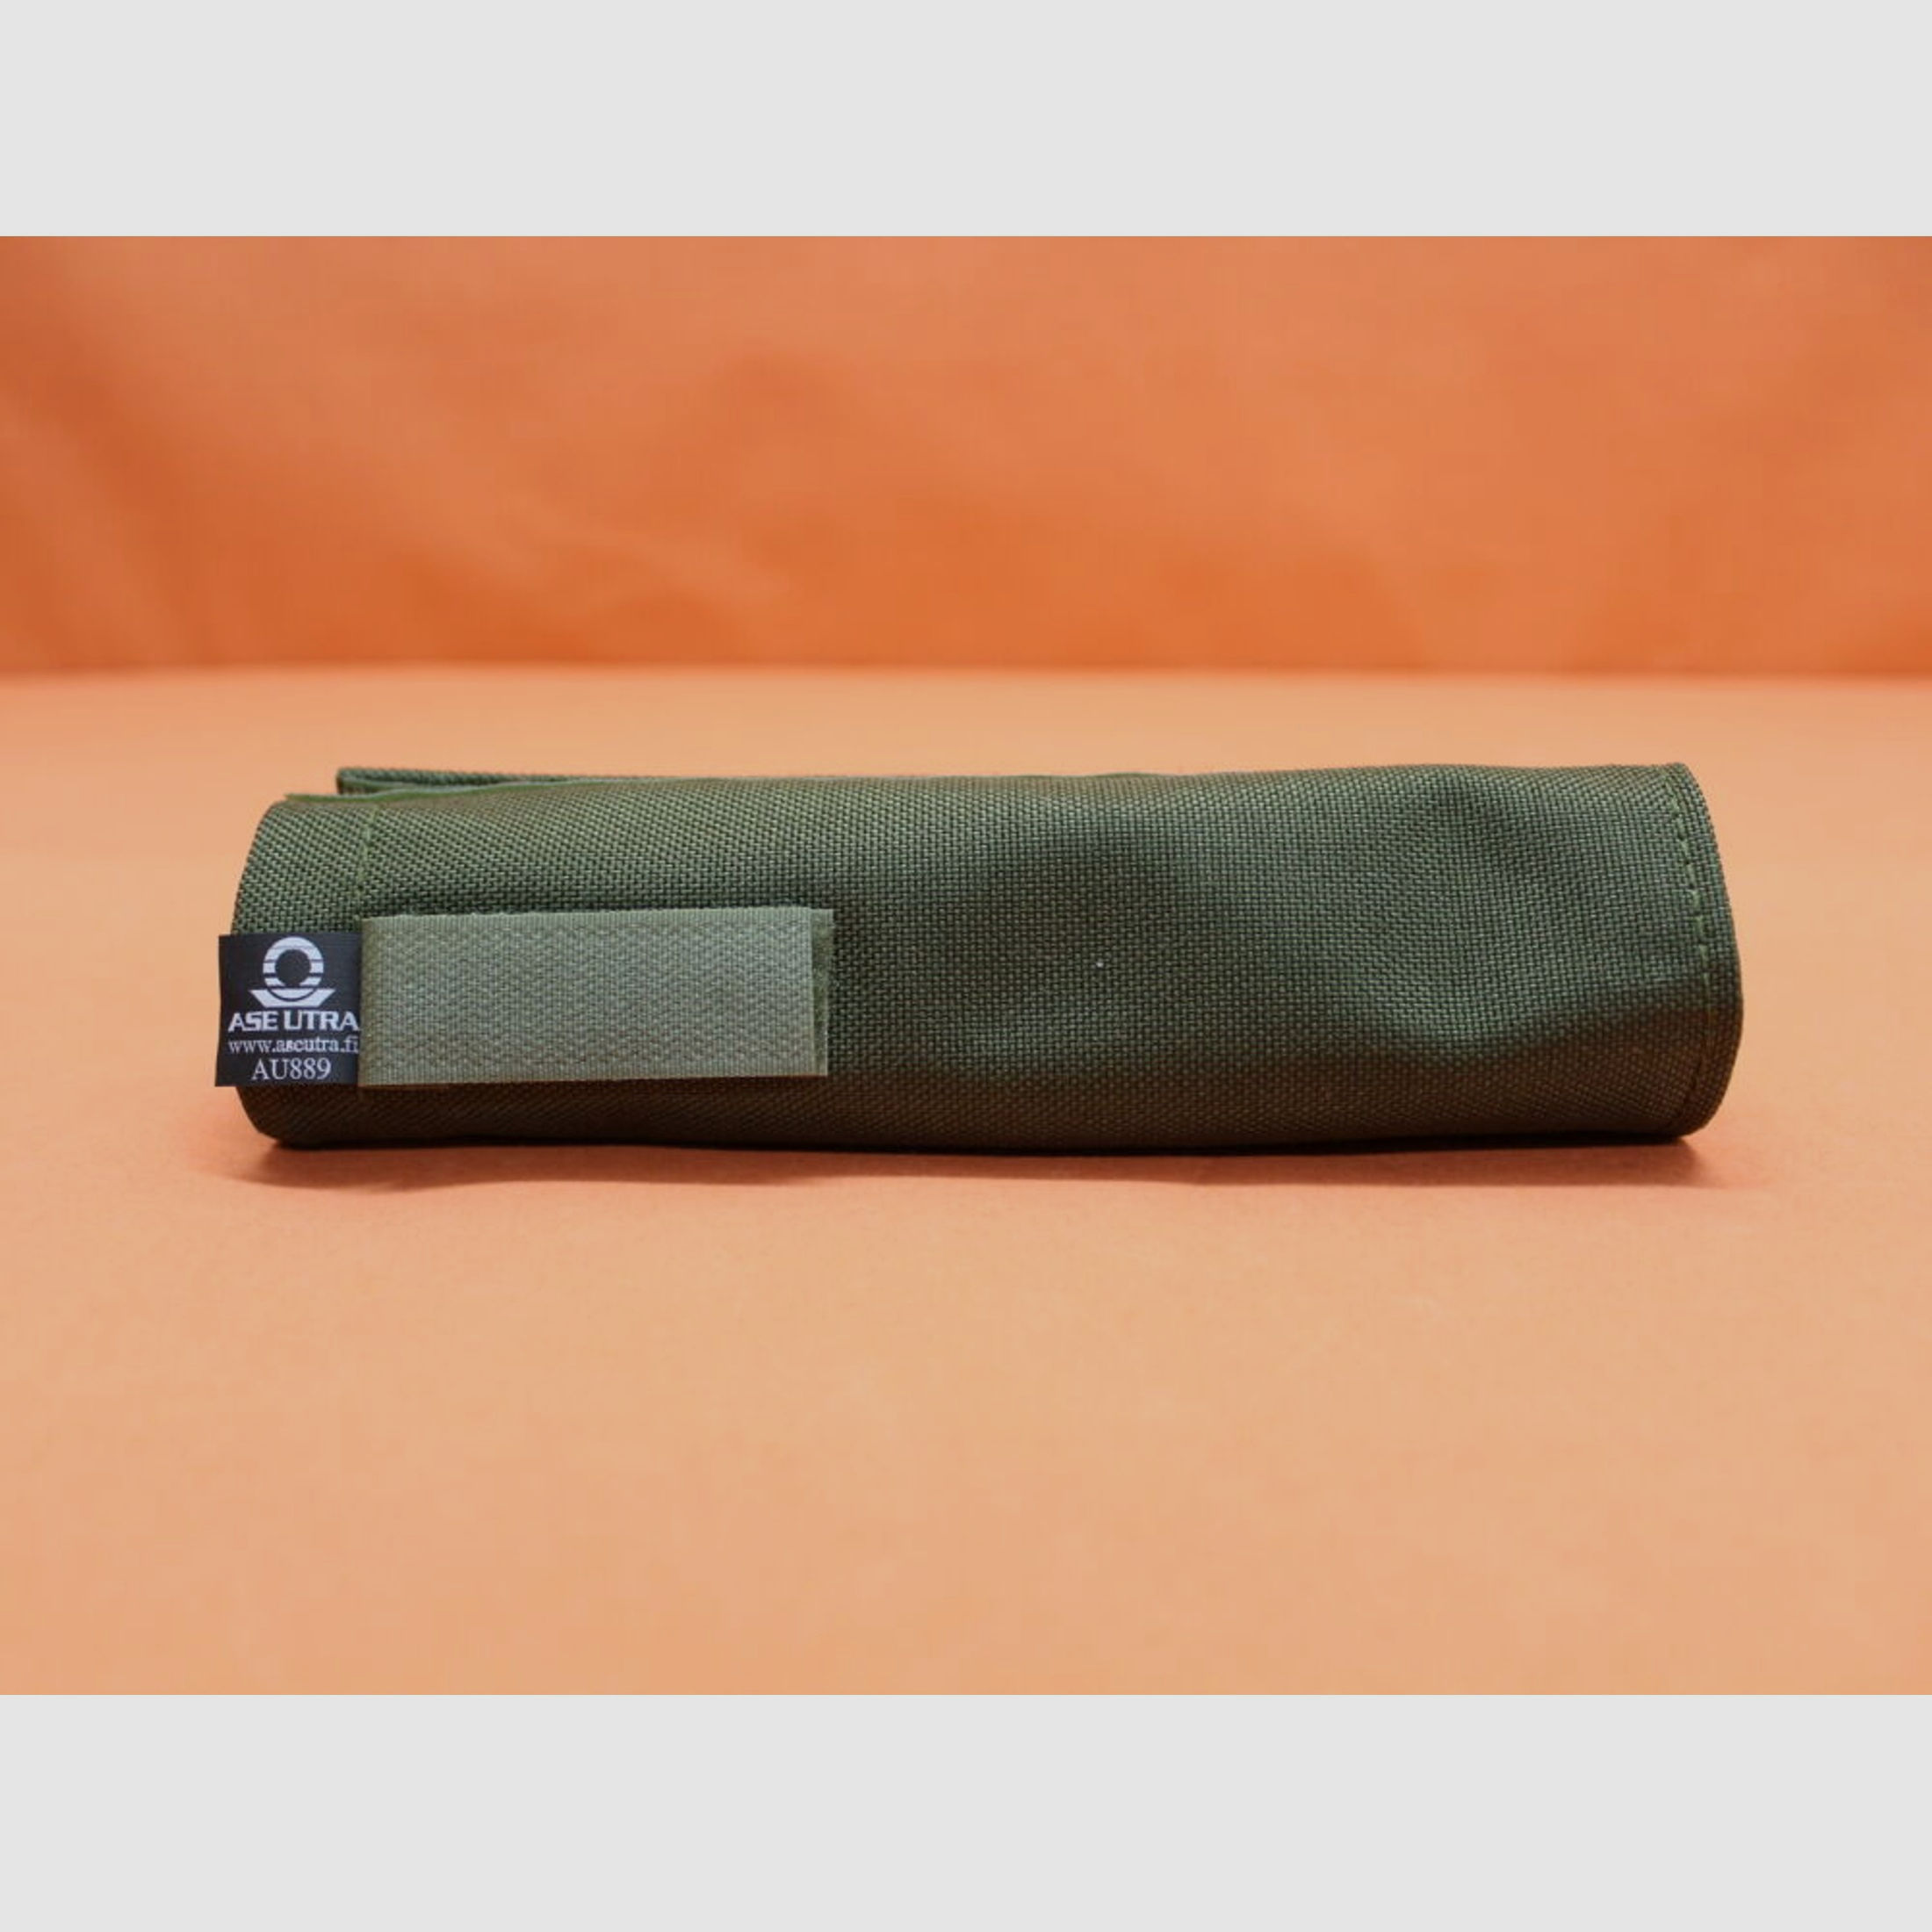 ASE Utra	 ASE Utra Heat/ Mirage Cover (AU889) OD Green Nomex/ Cordura für Jet-Z Compact